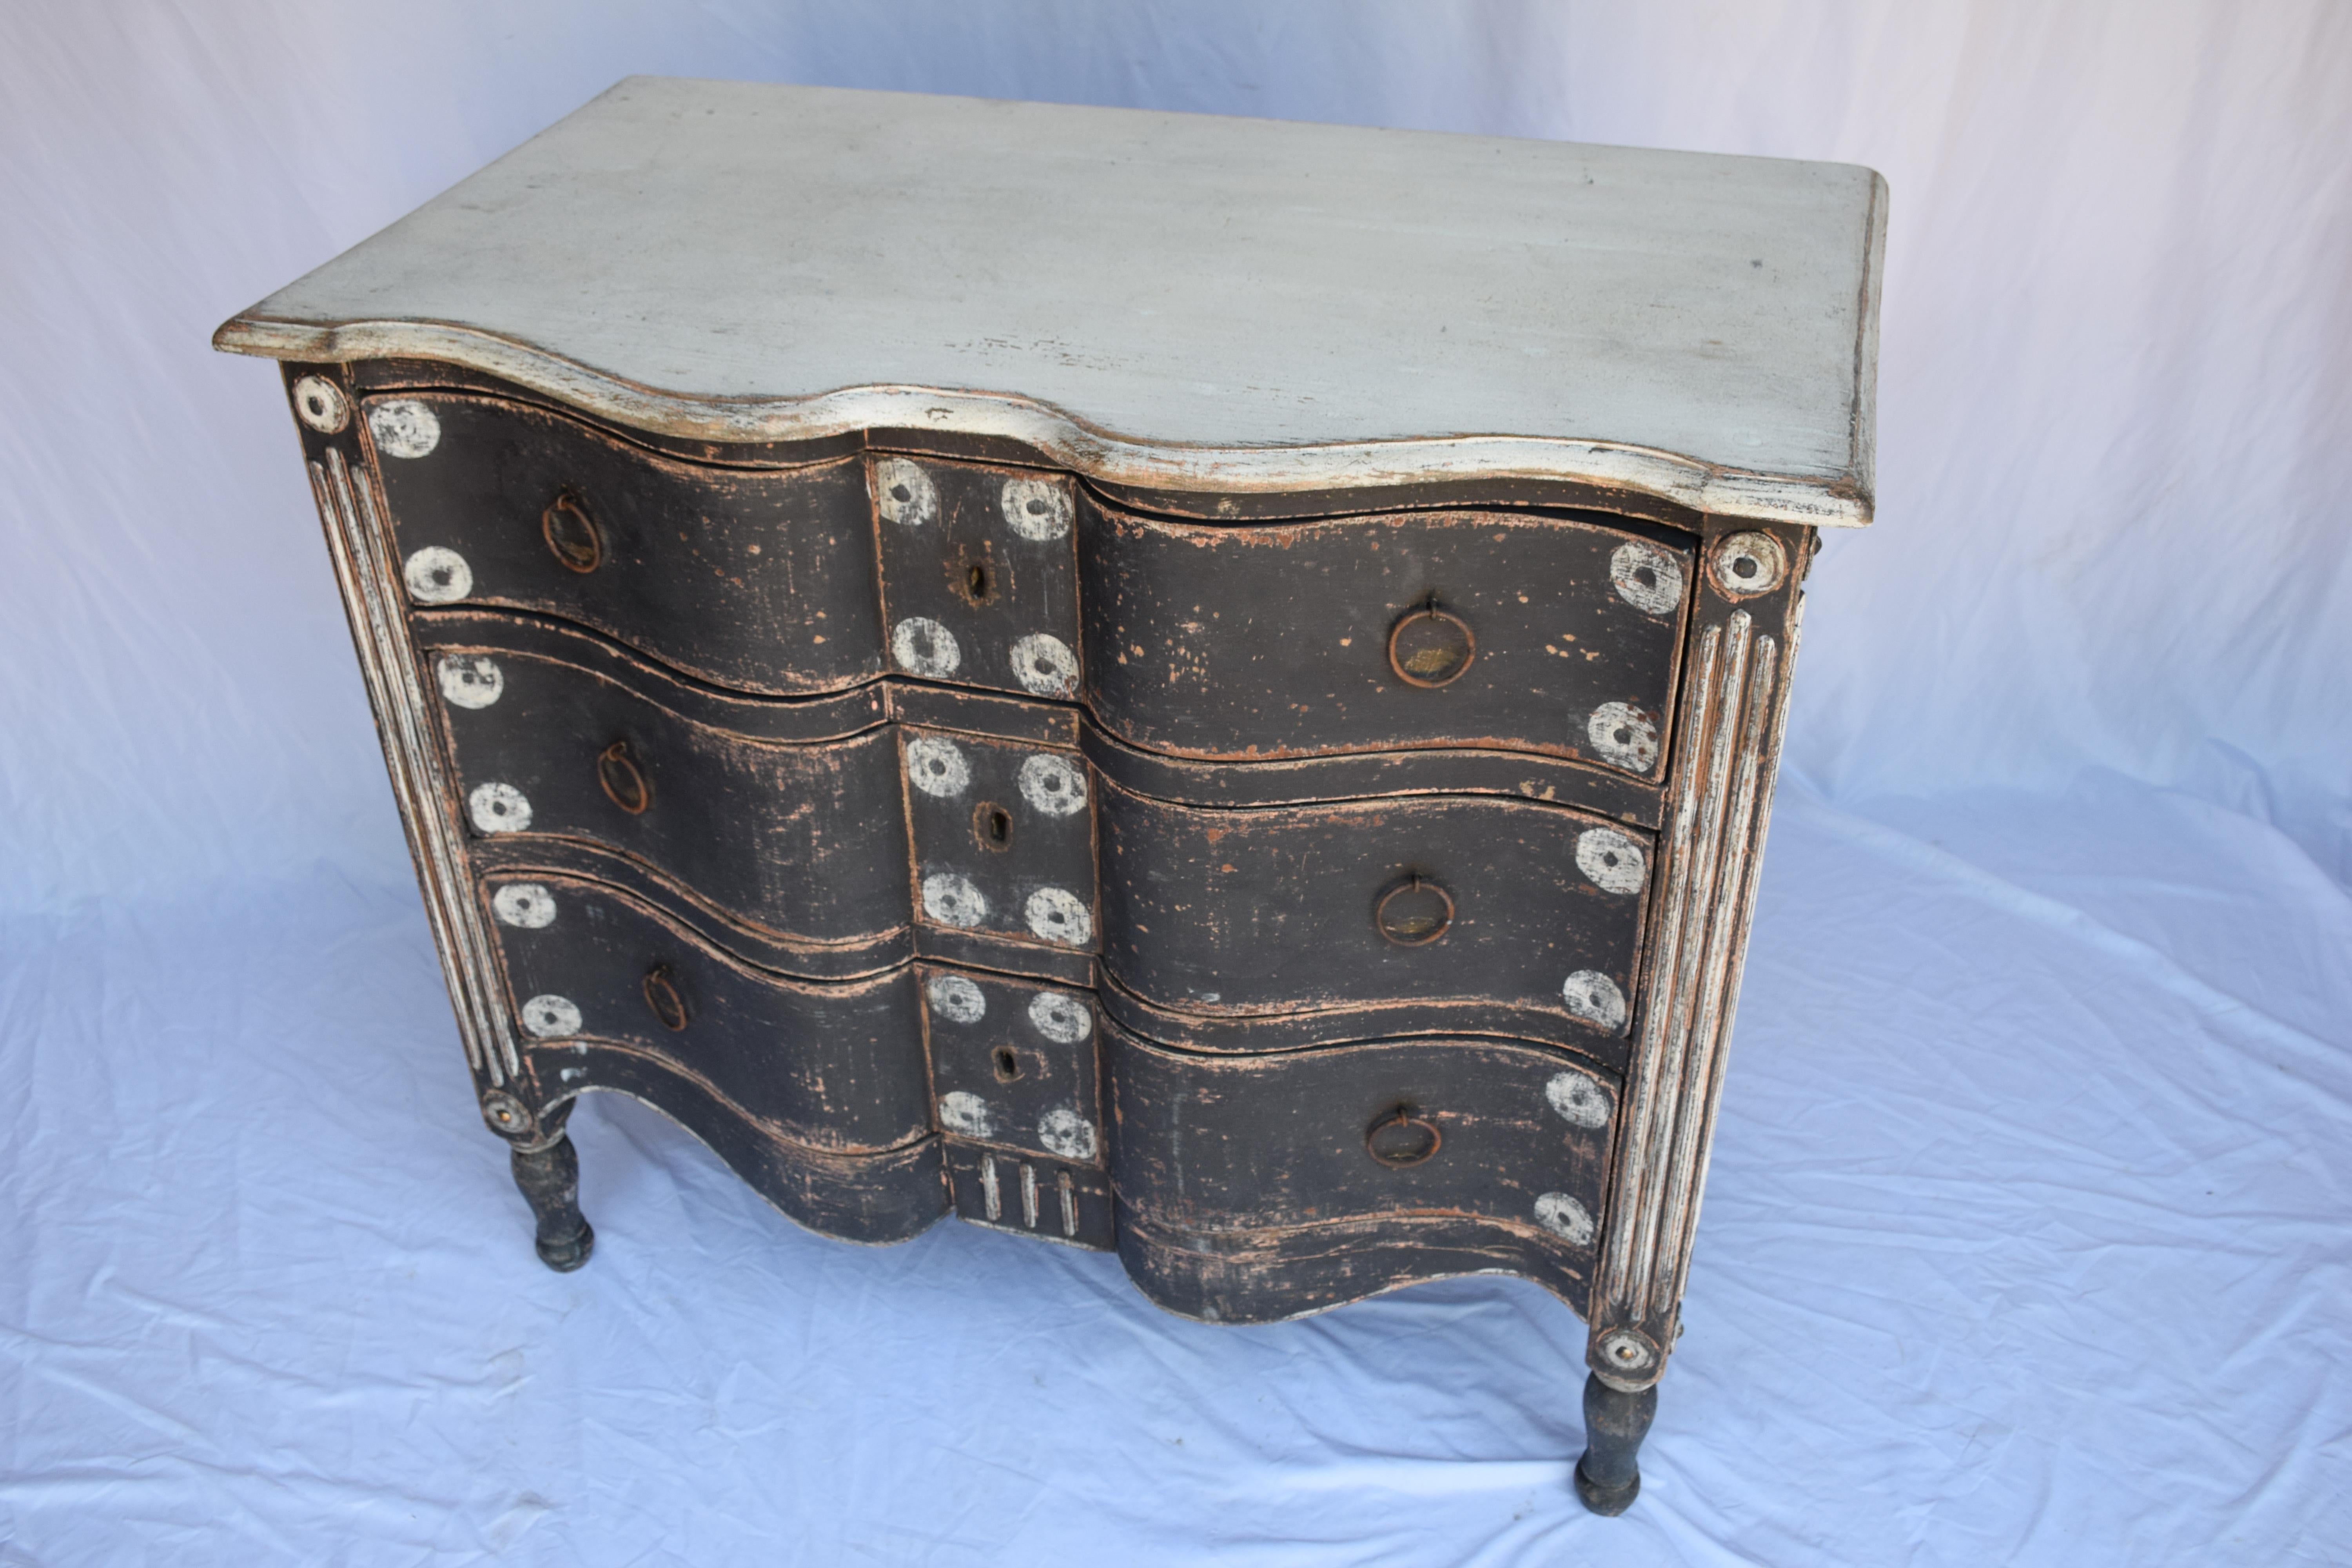 This charming antique painted Italian rococo style dresser has a beautifully aged black and white painted patina on the base with the top painted a contrasting white. 
 The dresser has a curved rococo front and three serpentine shaped drawers and